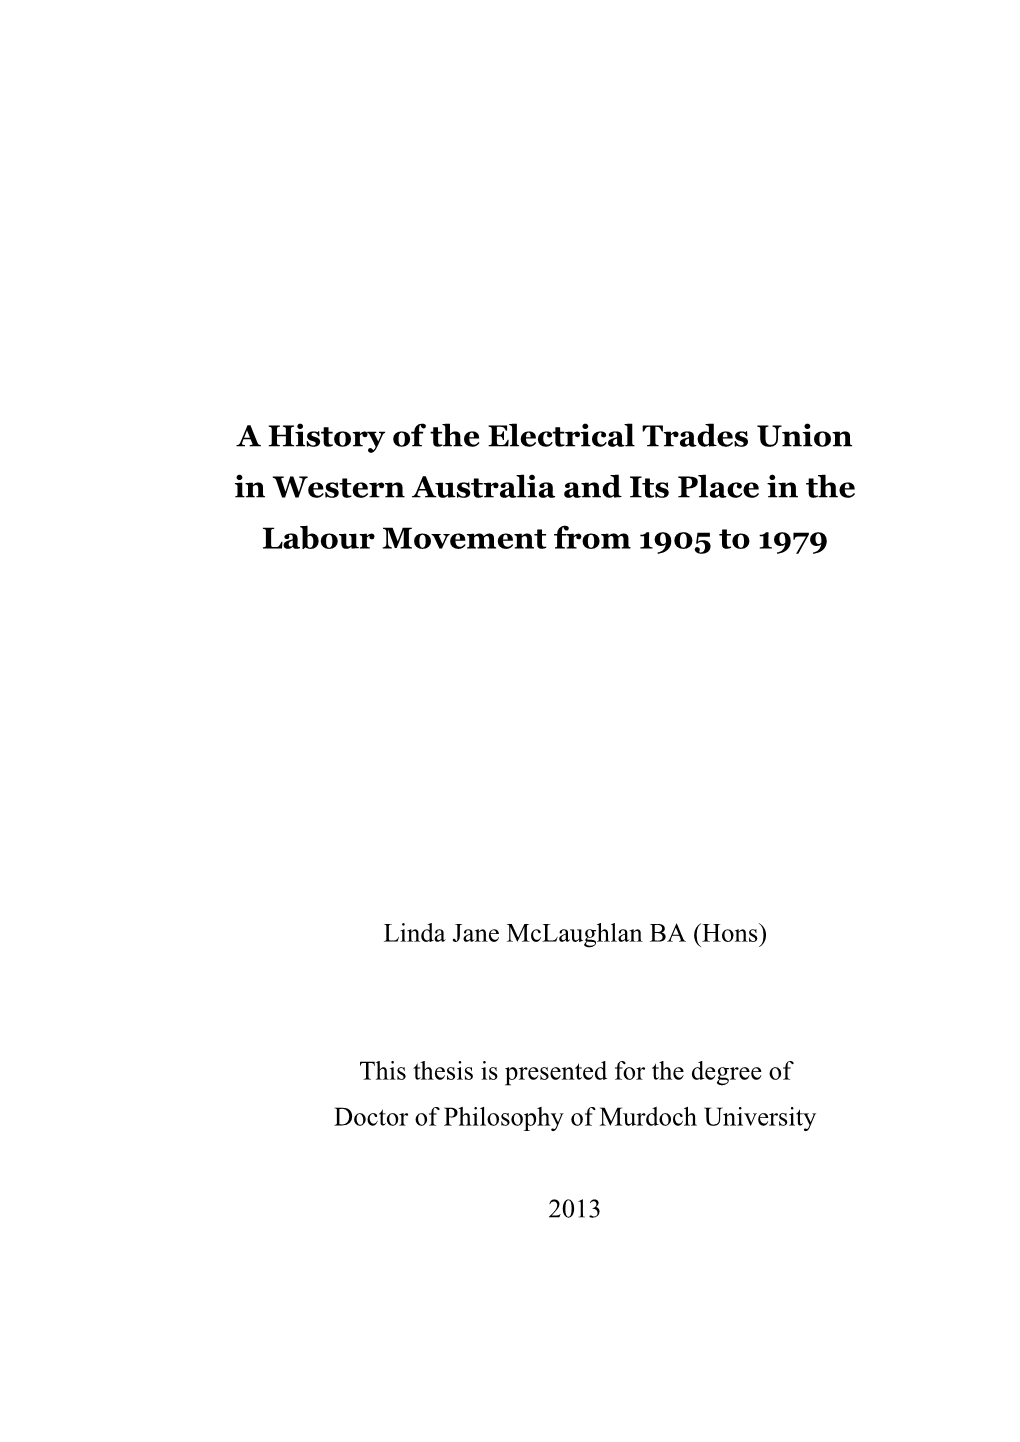 A History of the Electrical Trades Union in Western Australia and Its Place in the Labour Movement from 1905 to 1979